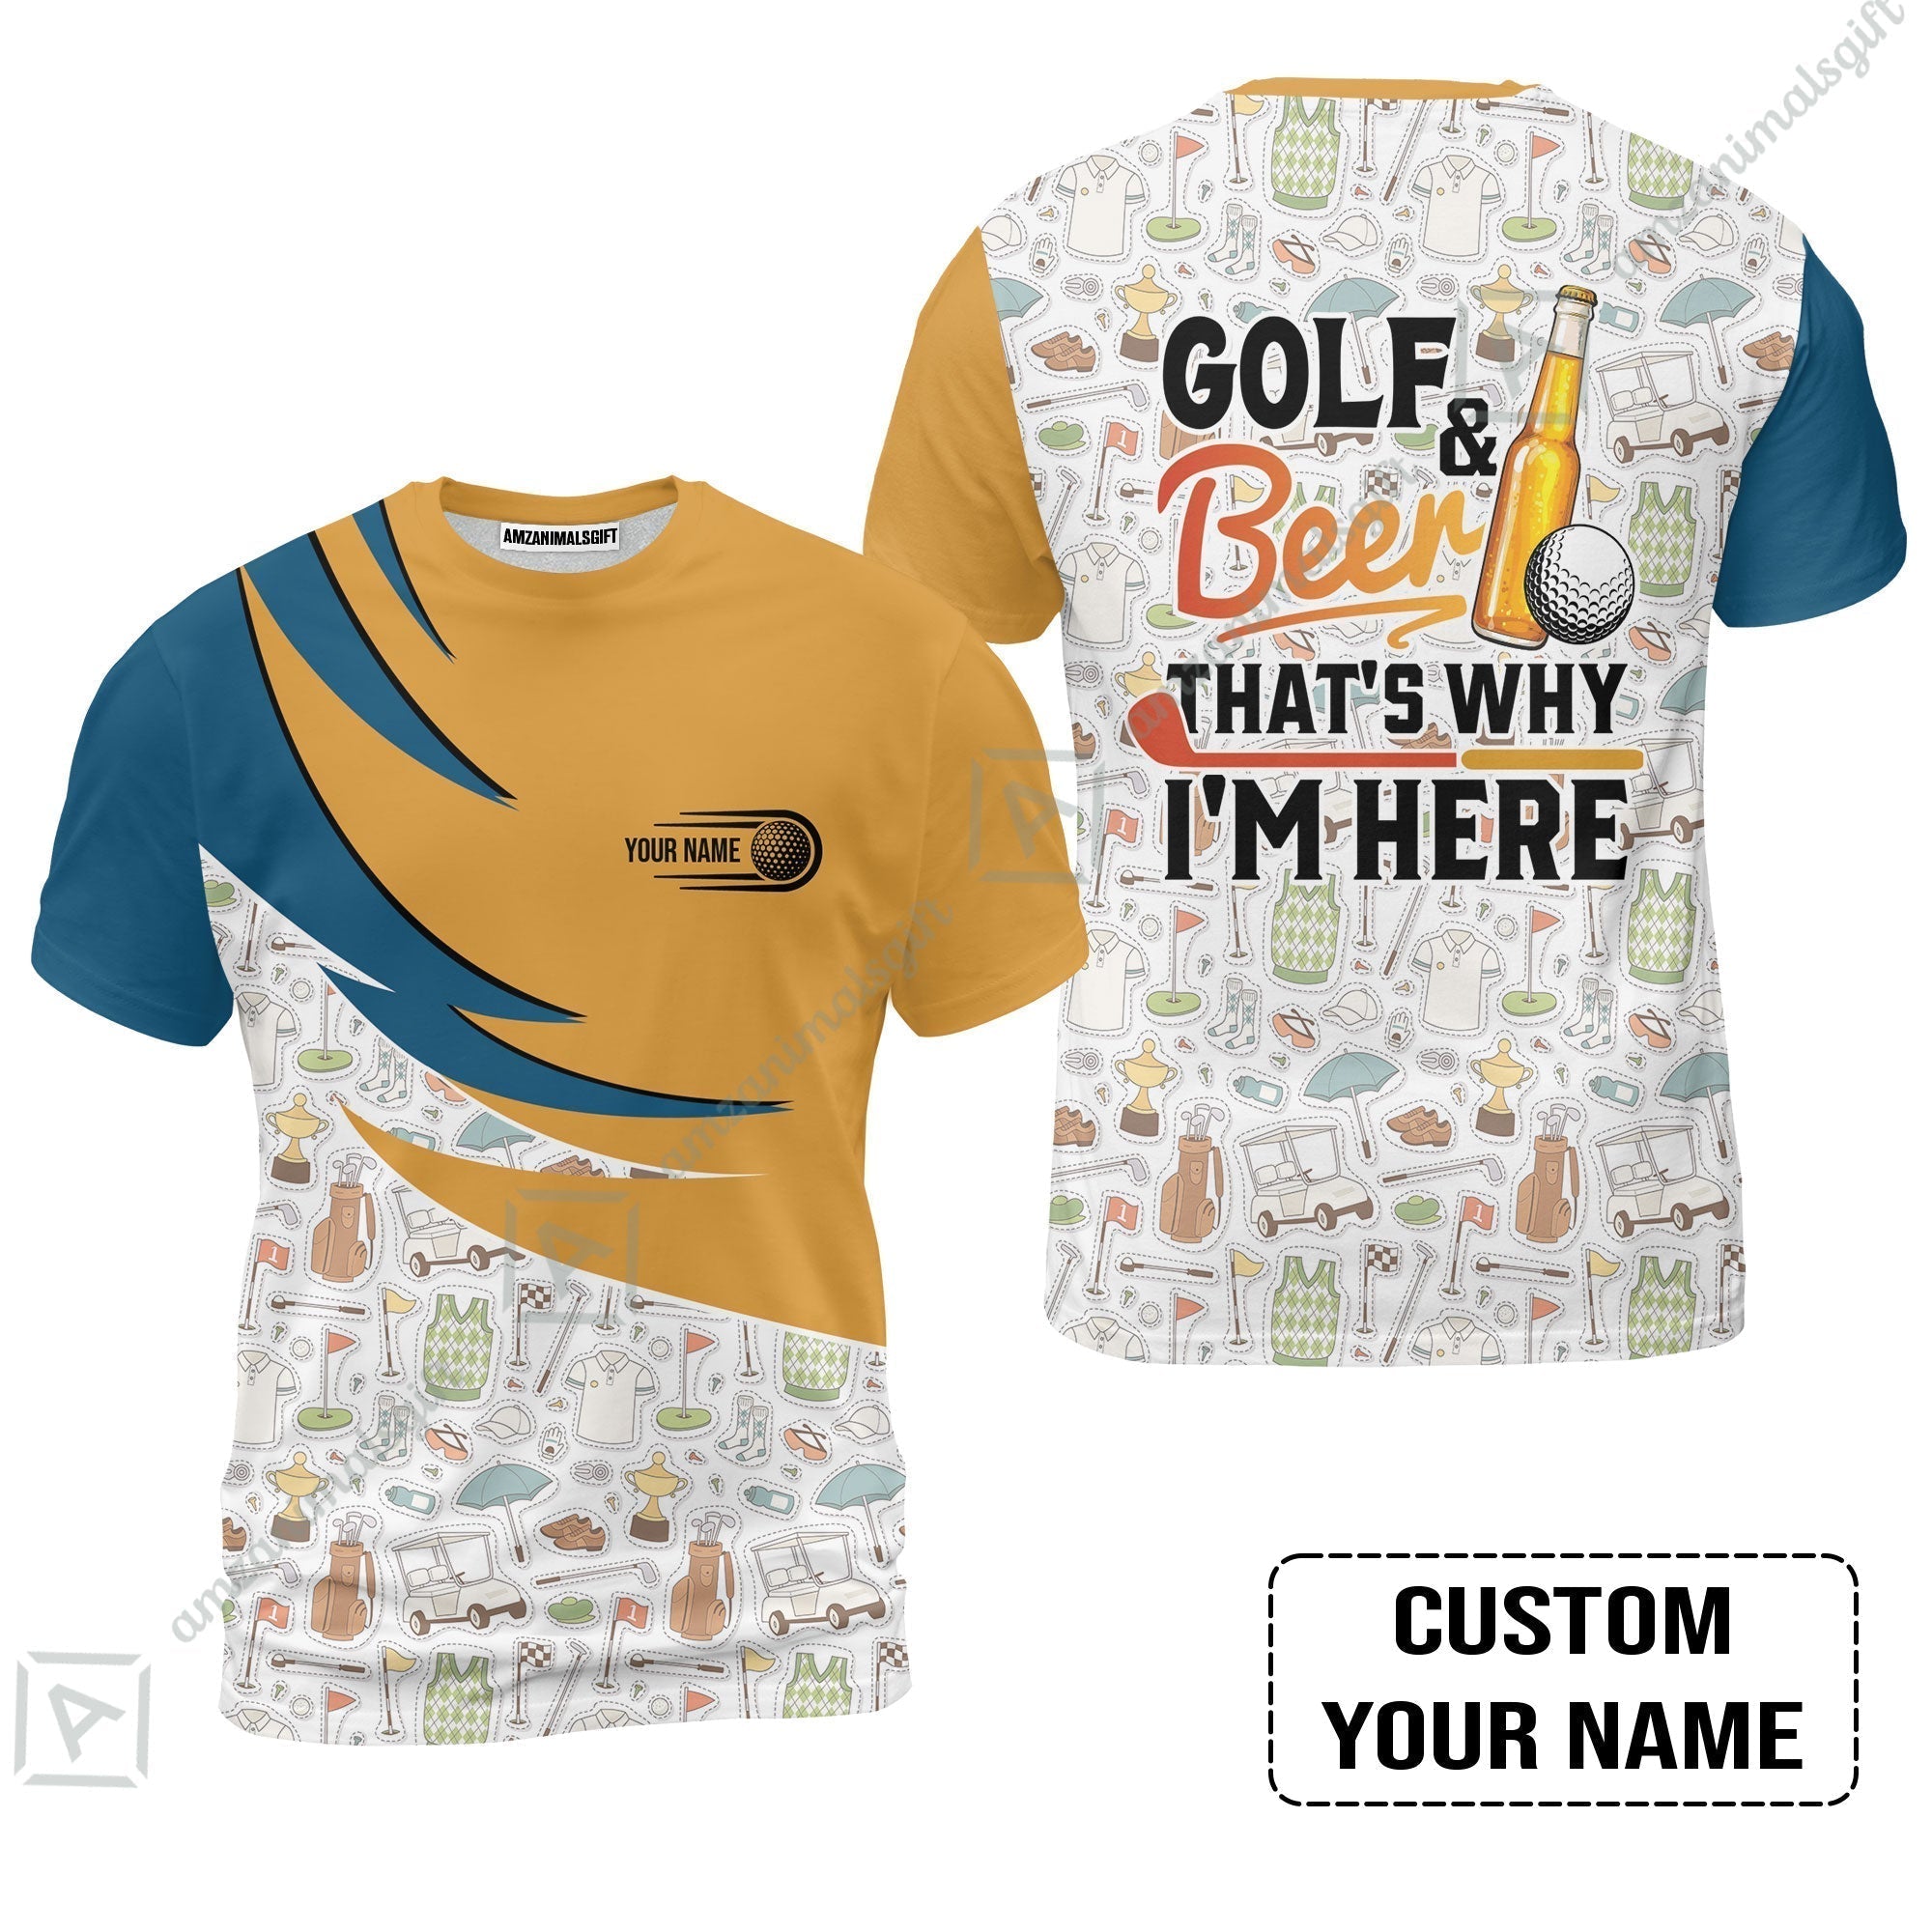 Customized Golf And Beer T-Shirt, Personalized Custom Name Beer And Golf T-Shirt